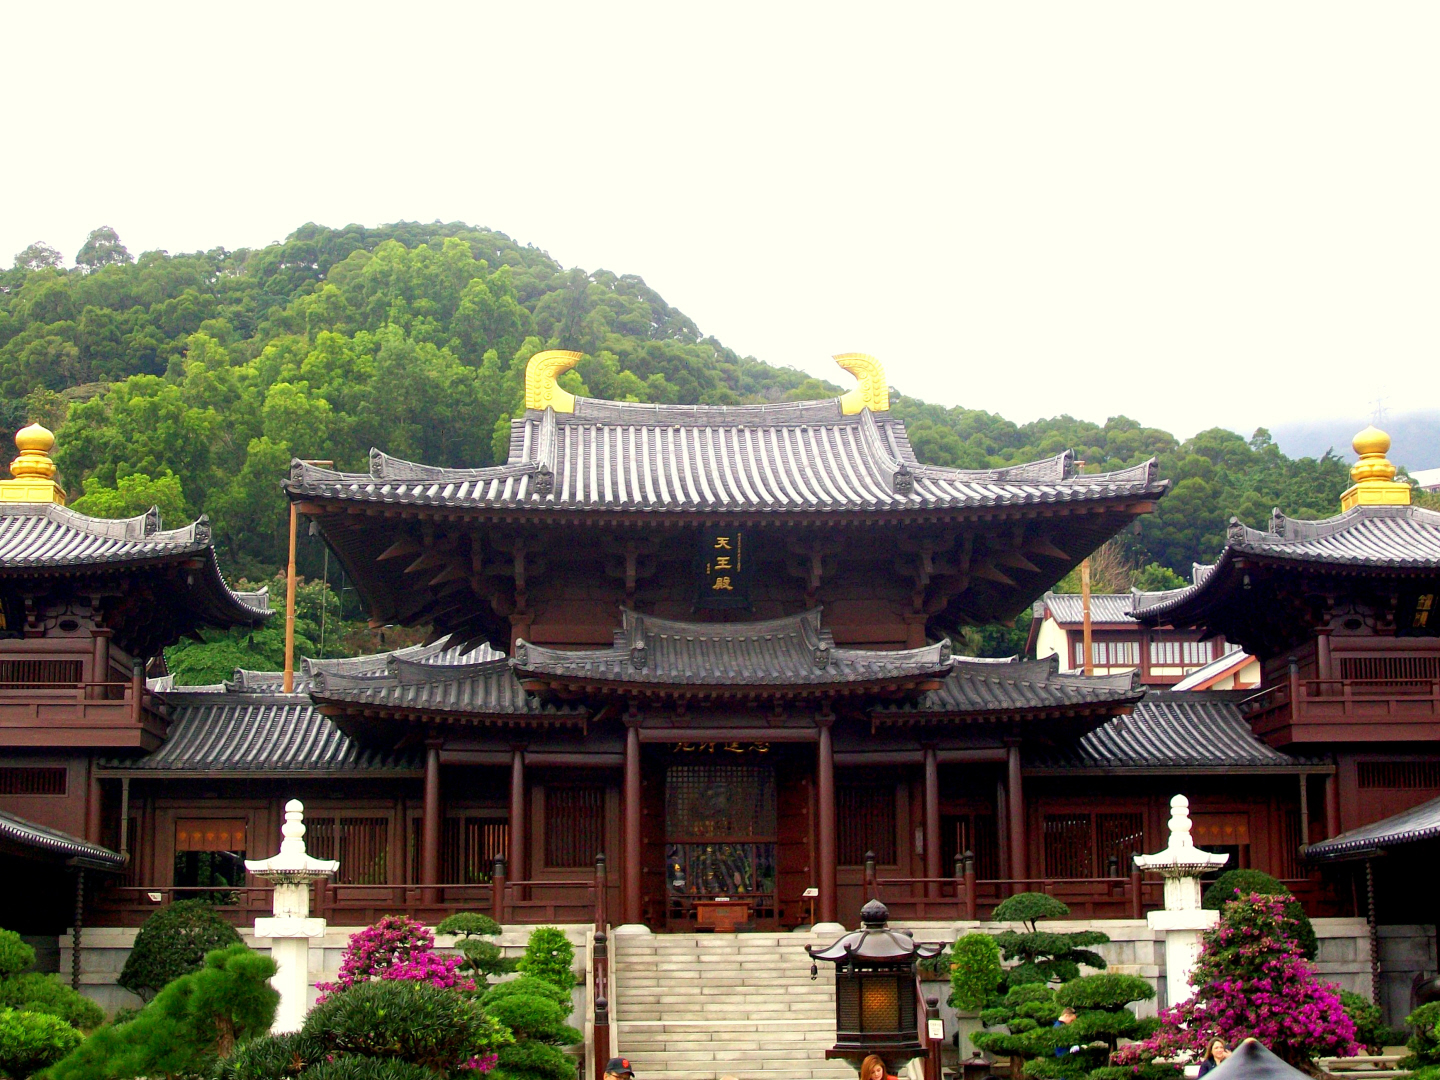 Exquisite Chi Lin Buddhist Nunnery - Kowloon Island off of Hong Kong